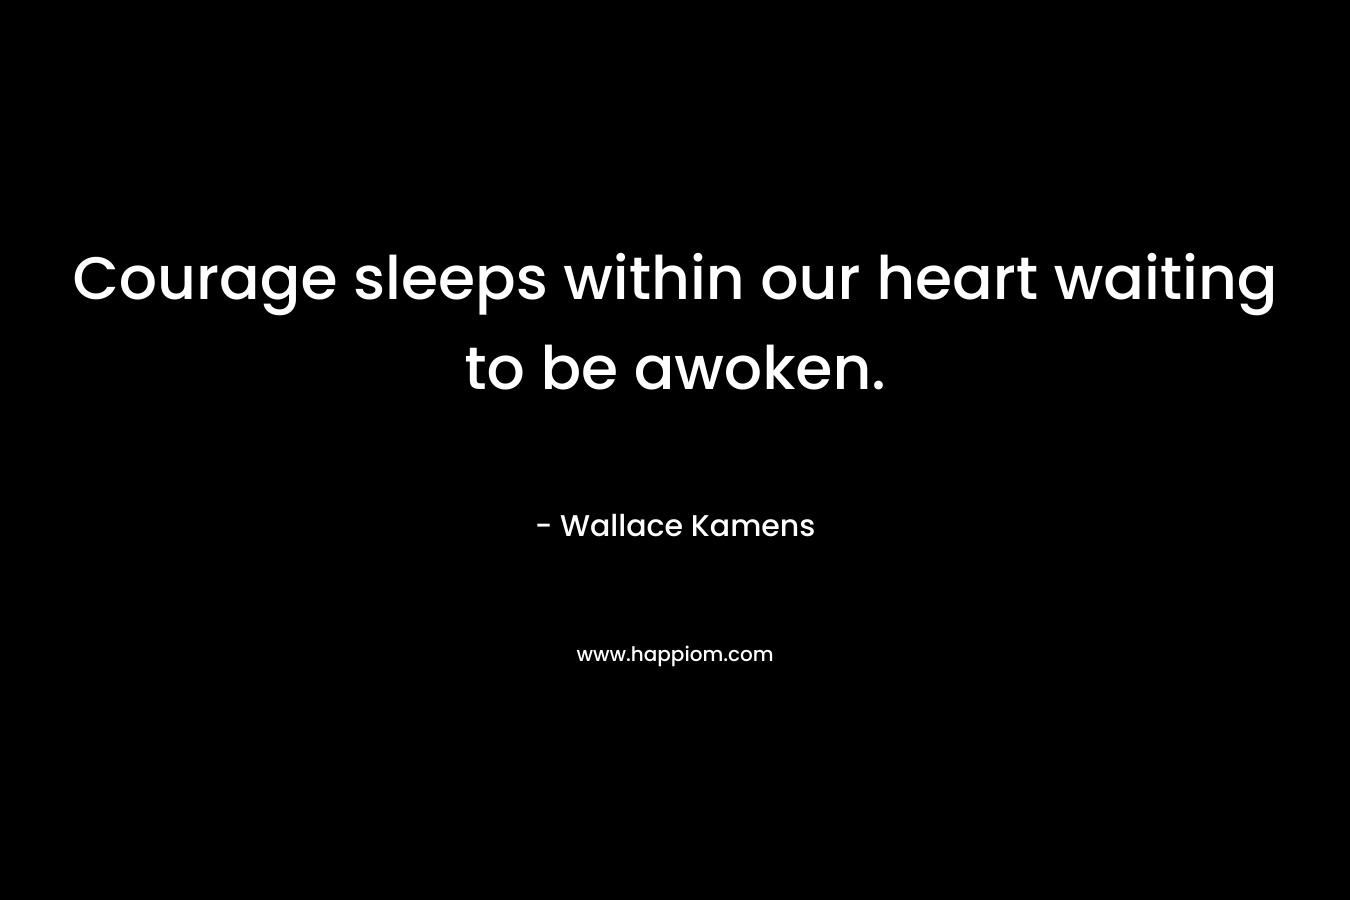 Courage sleeps within our heart waiting to be awoken. – Wallace Kamens